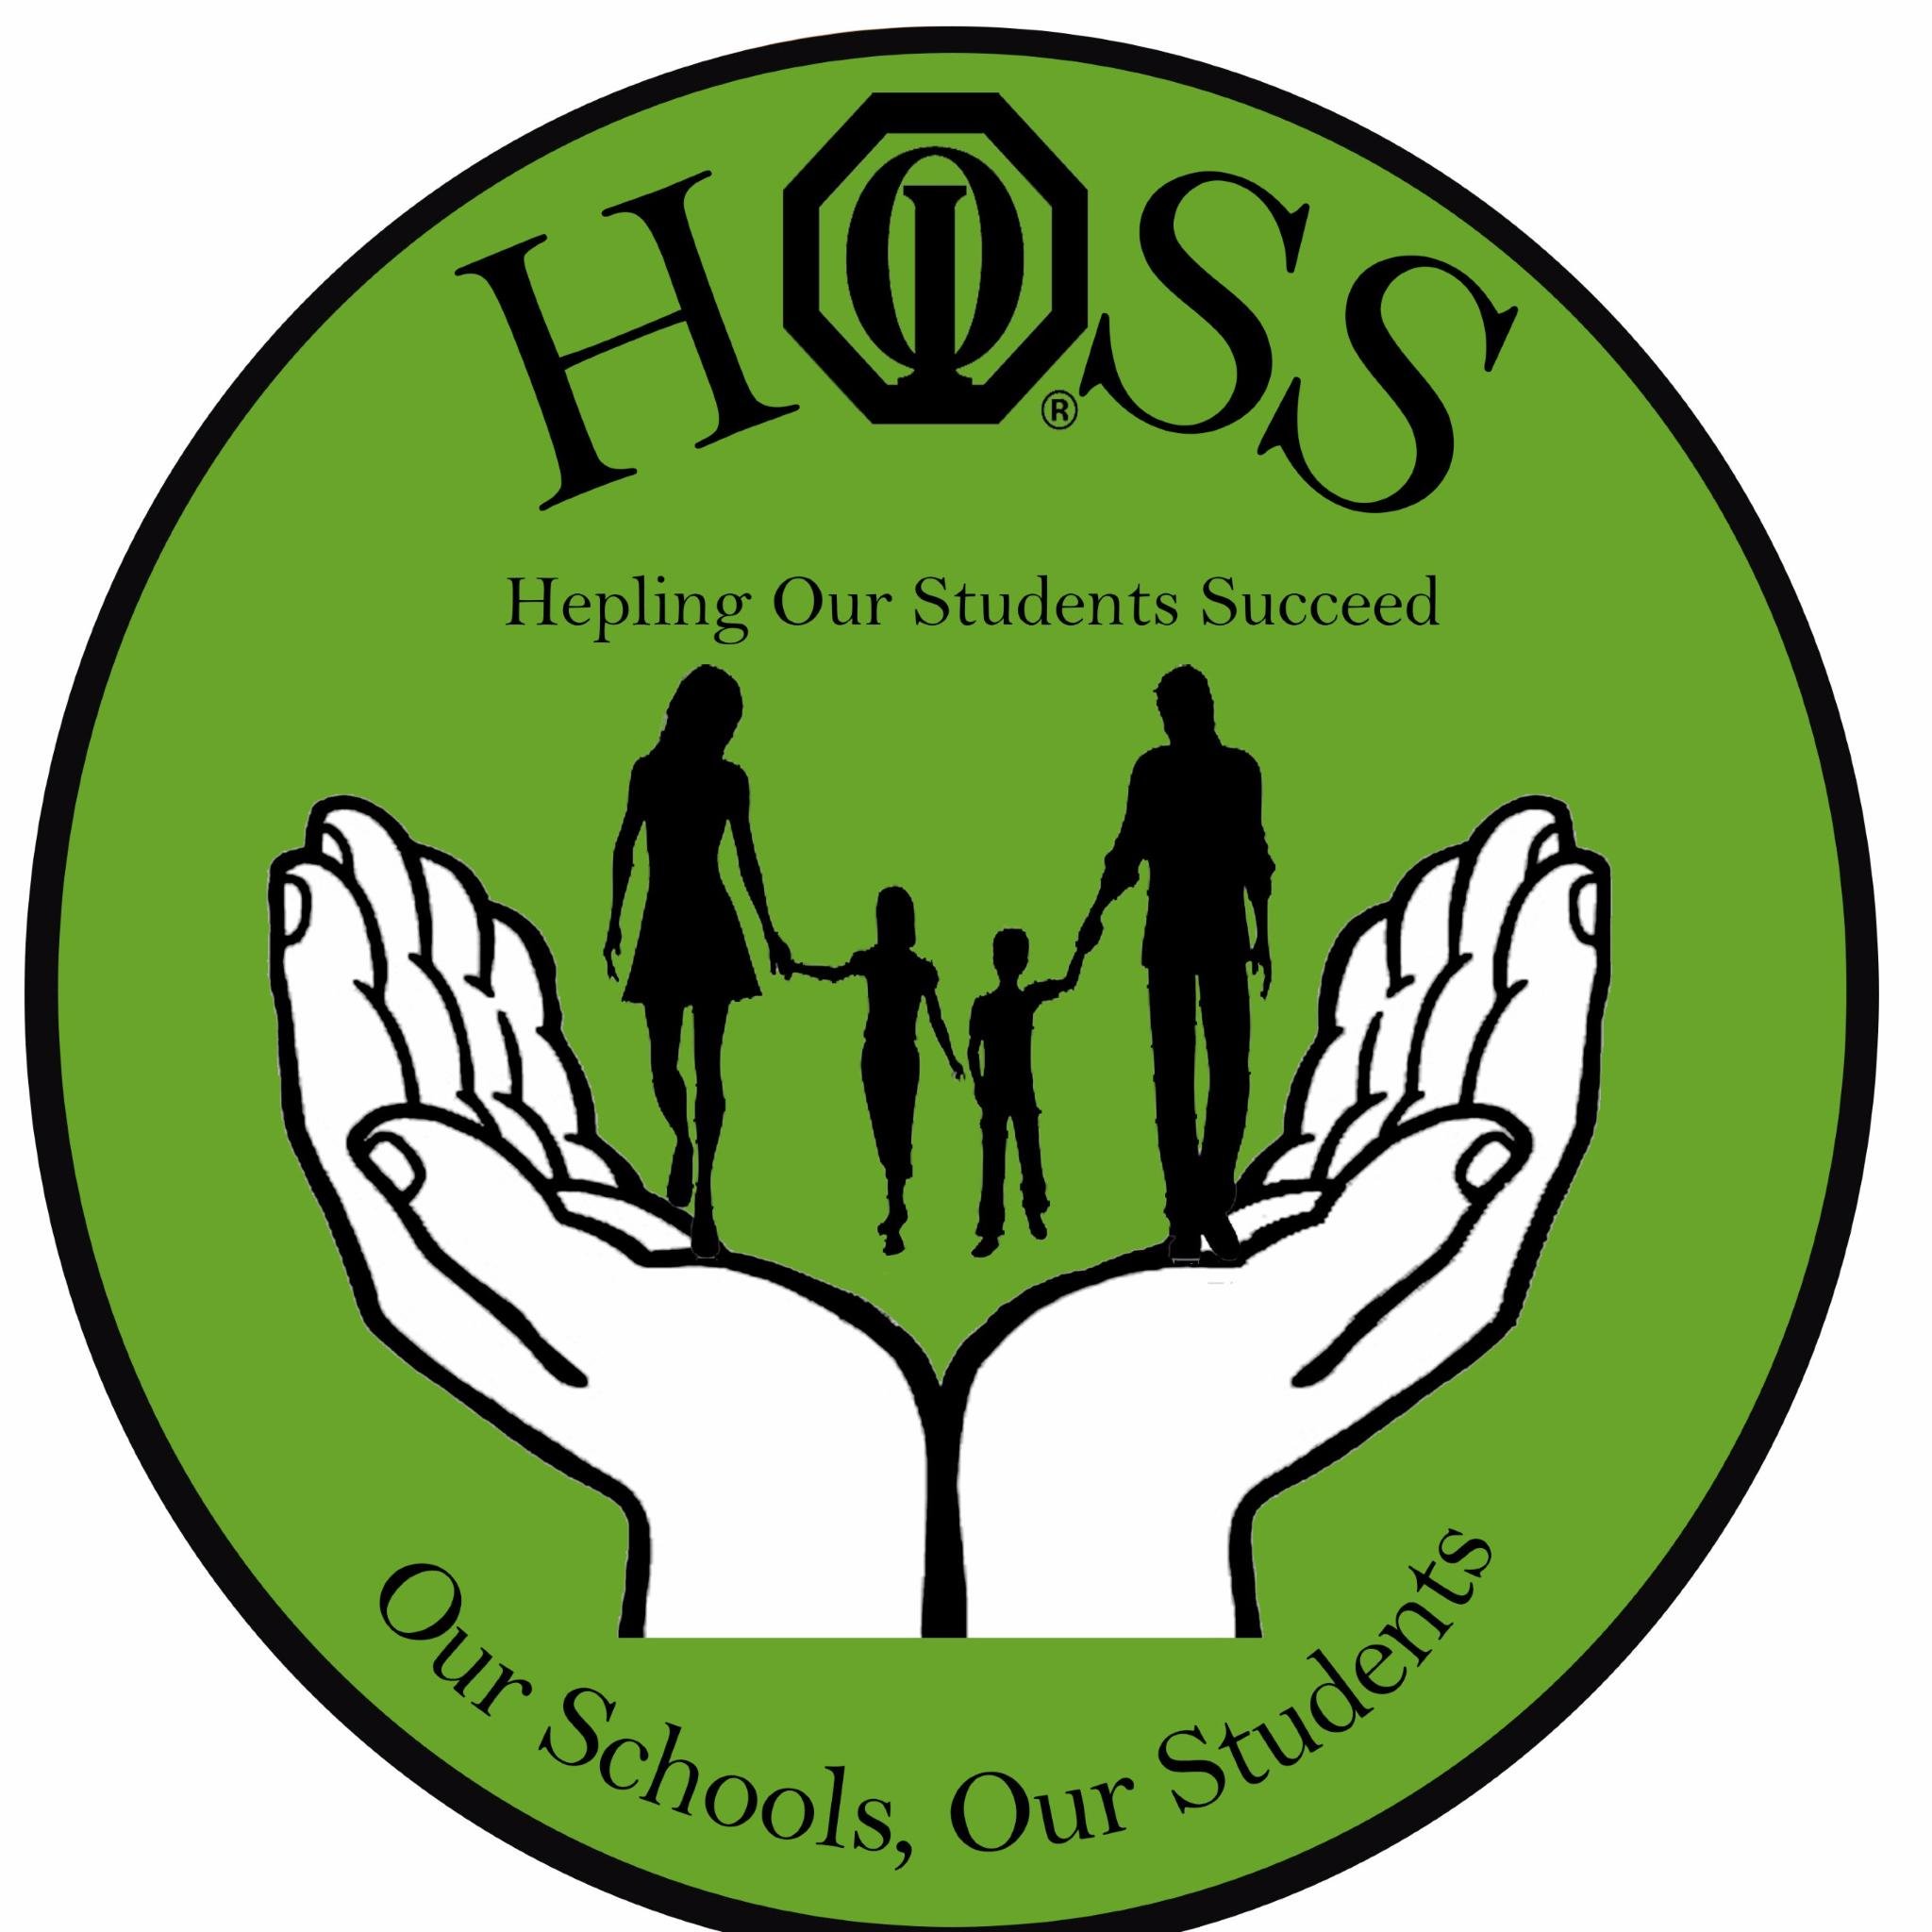 CUPE Local 27, part of the Greater Essex County District School Board; dedicated to Helping Our Students Succeed (HOSS) through financial support.